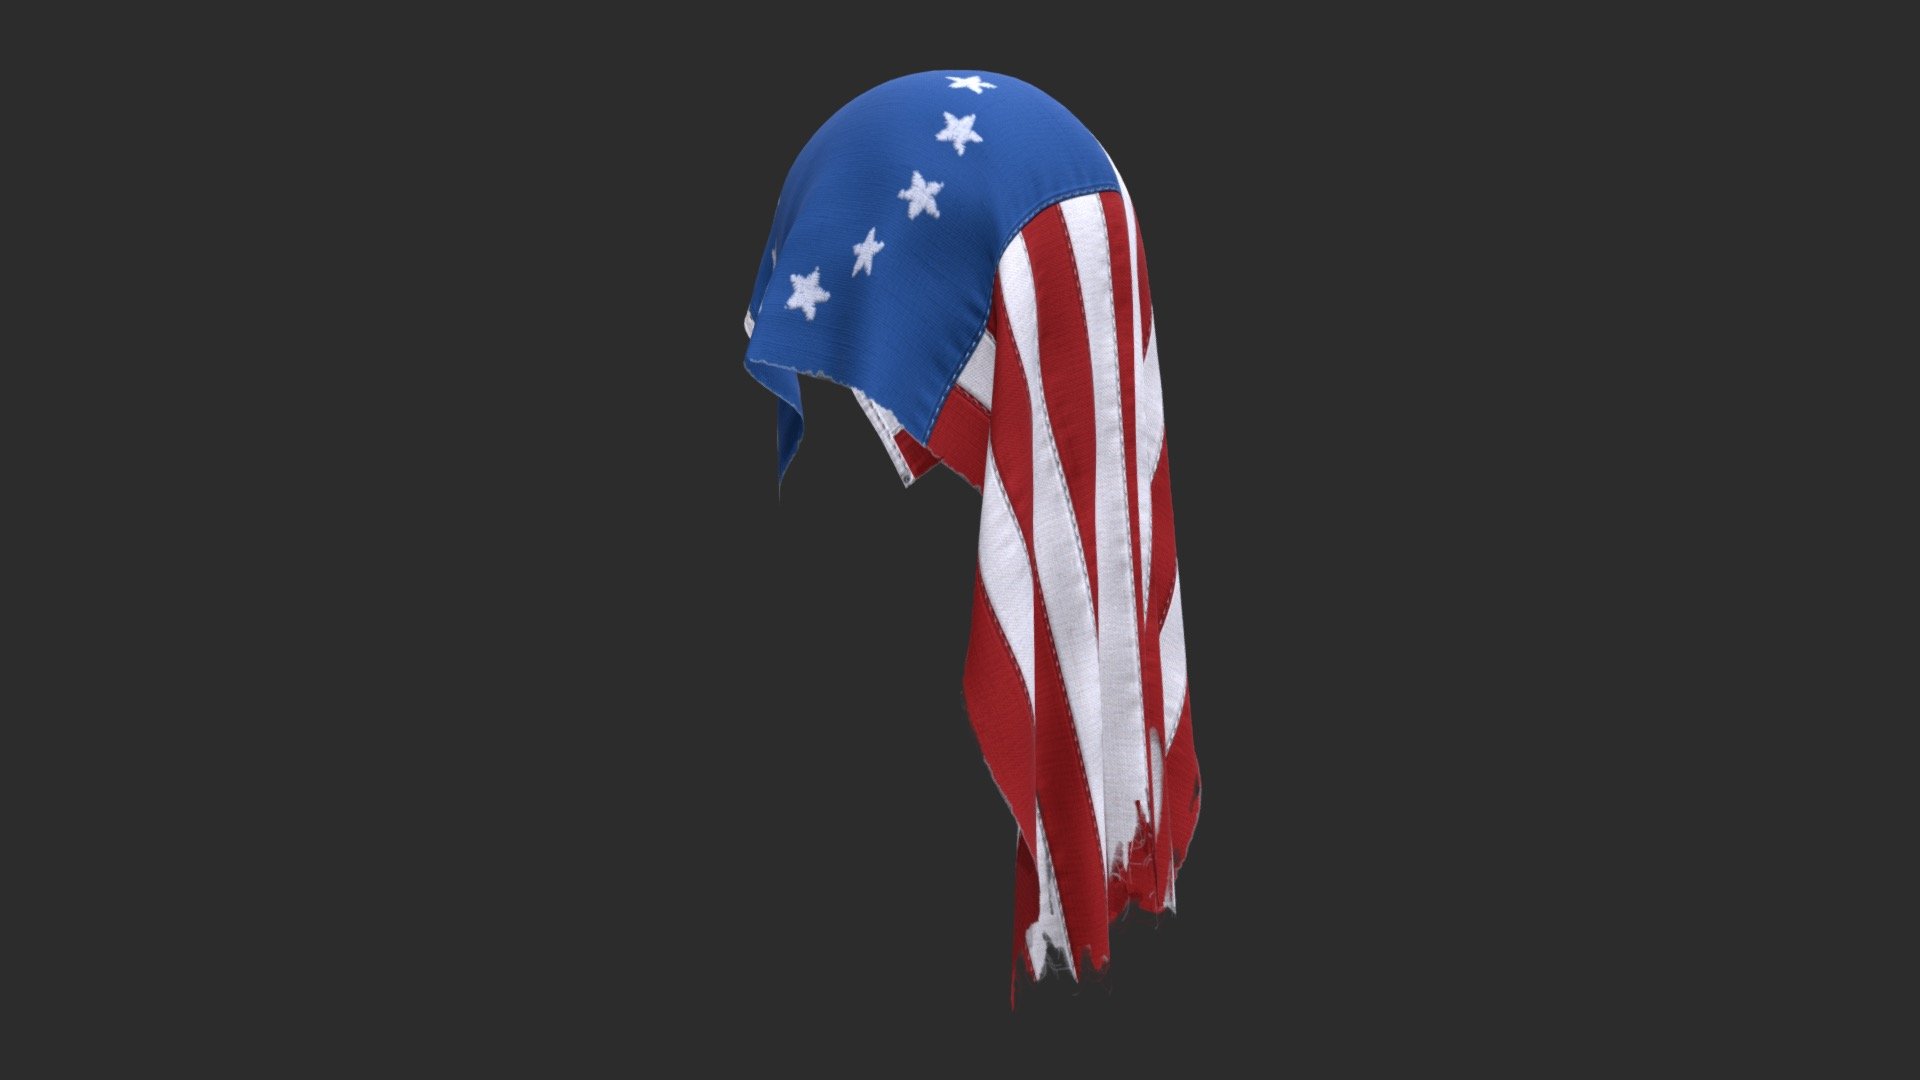 The Betsy Ross flag is an early design of the flag of the United States, named for early American upholsterer and flag maker Betsy Ross. Its distinguishing feature is thirteen 5-pointed stars arranged in a circle representing the 13 colonies that fought for their independence during The American Revolutionary War.

The Textures Maps are in 2K and ready for PBR workflow.

This asset includes the Blender native file, an animated version in low-poly and some static pose variants. The textures includes 3 variants of the Flag : Clean, Dirty and Bloody.

ANIMATED ASSET




Objects : 1

Polygons : 36

Materials : 3

LODs : No

ANIMATIONS




Rigged : Yes (including armature and bones, no physics animations)

Actions : 2 (Simple in 138 frames - Natural in 575 frames)

Loop : Yes



STATIC ASSETS




Objects : 5

Polygons : 144 or 576

Materials : 3 (sames as the animated version)

LODs : Yes

Number of LODs : 2

 - Betsy Ross flag - US 13 Stars - Buy Royalty Free 3D model by KangaroOz 3D (@KangaroOz-3D) 3d model